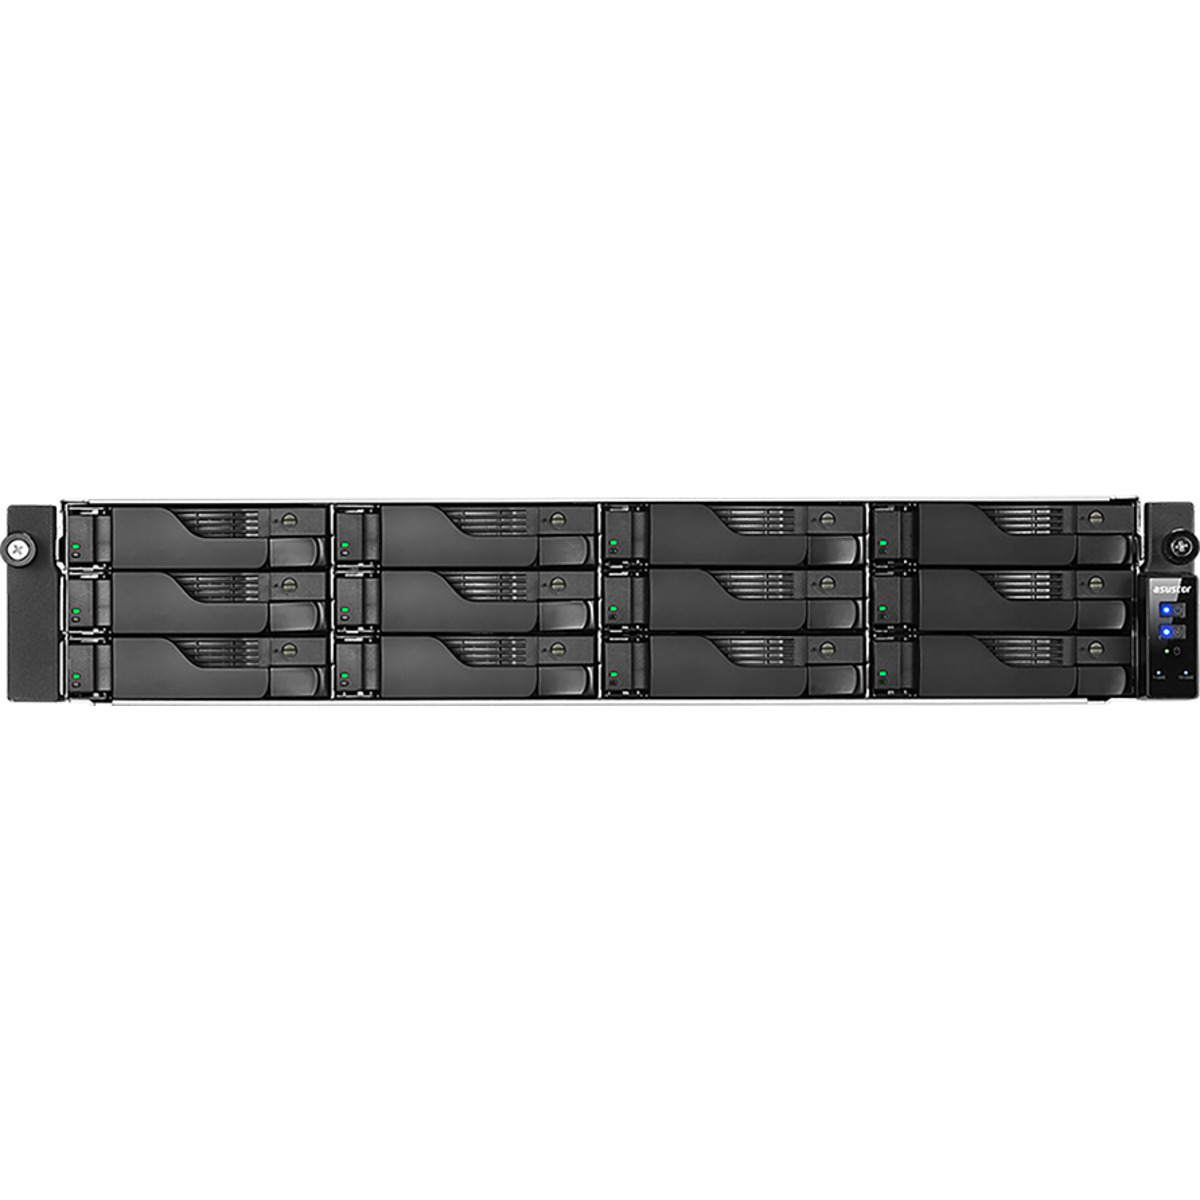 ASUSTOR LOCKERSTOR 12RD AS6512RD RackMount 12-Bay Multimedia / Power User / Business NAS - Network Attached Storage Device Burn-In Tested Configurations - FREE RAM UPGRADE LOCKERSTOR 12RD AS6512RD